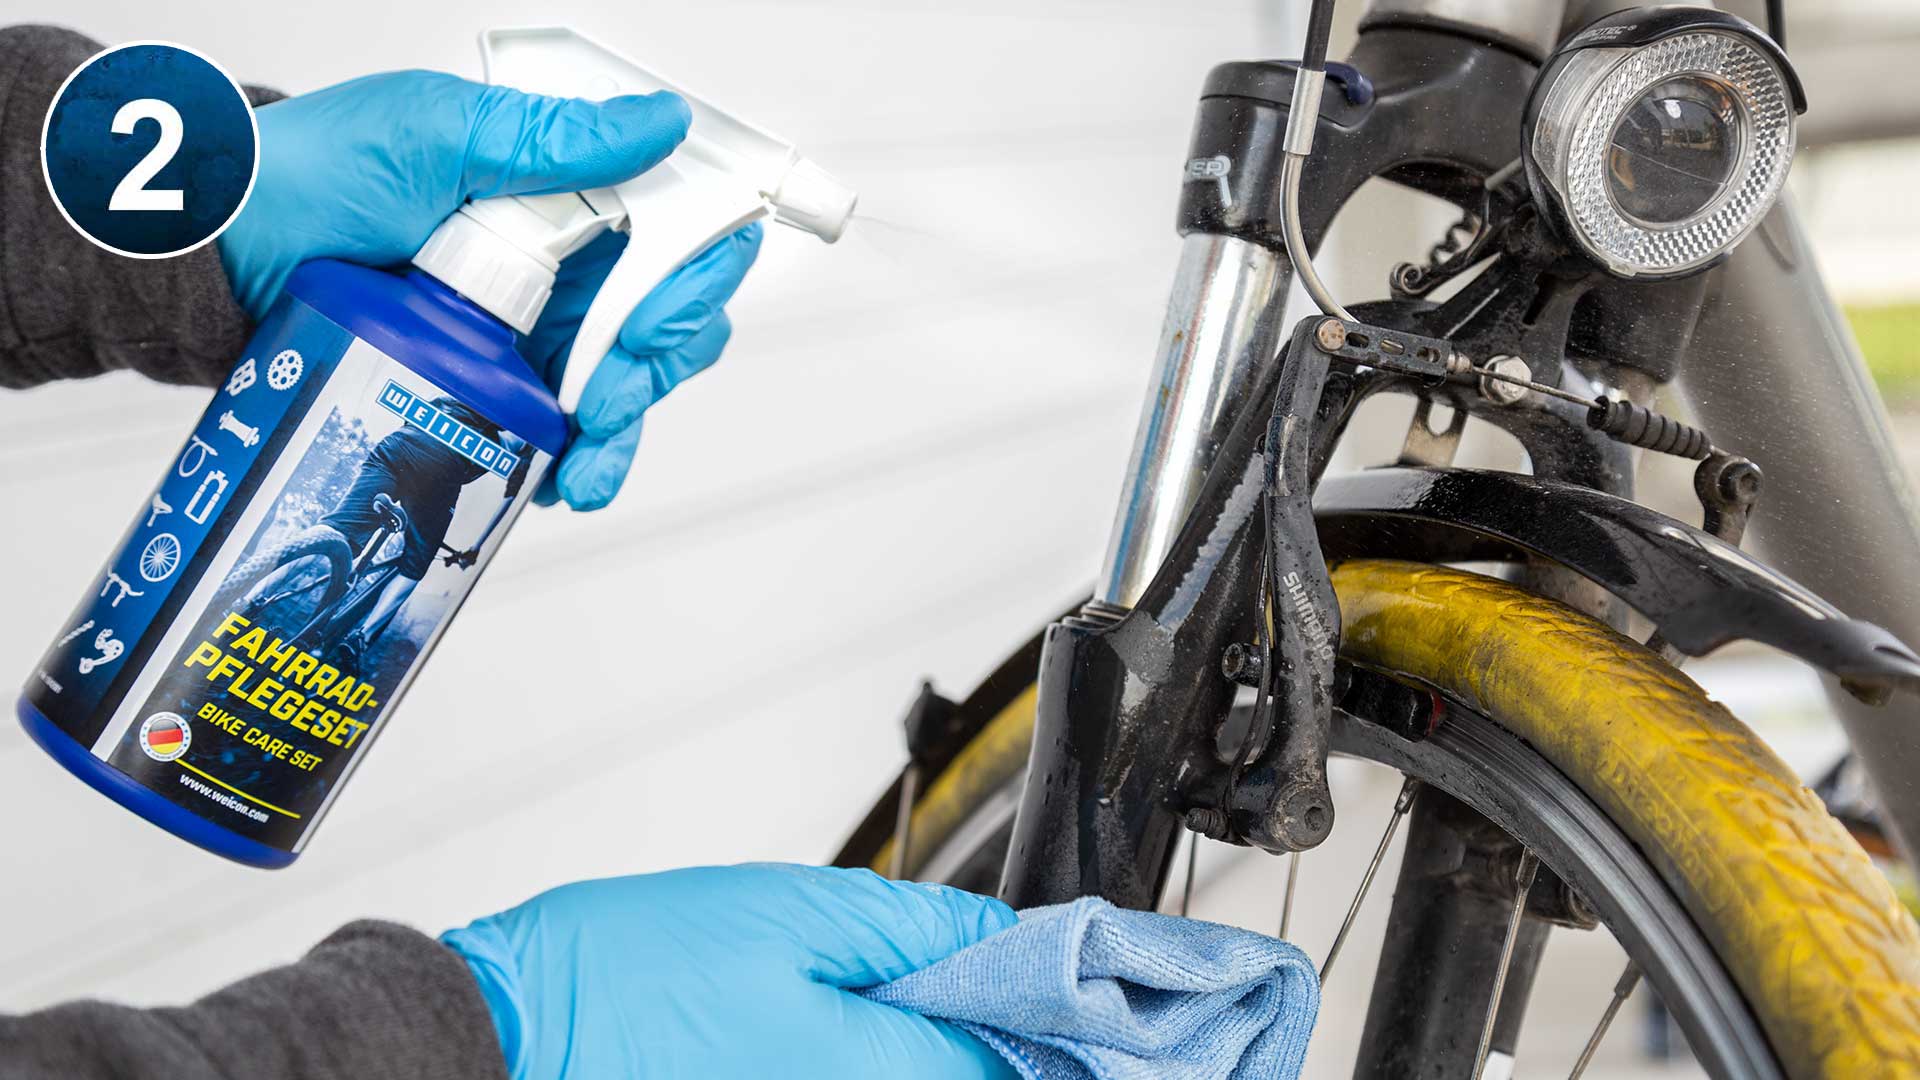 Apply cleaner to the entire bike, allow to take effect for 3-5 minutes